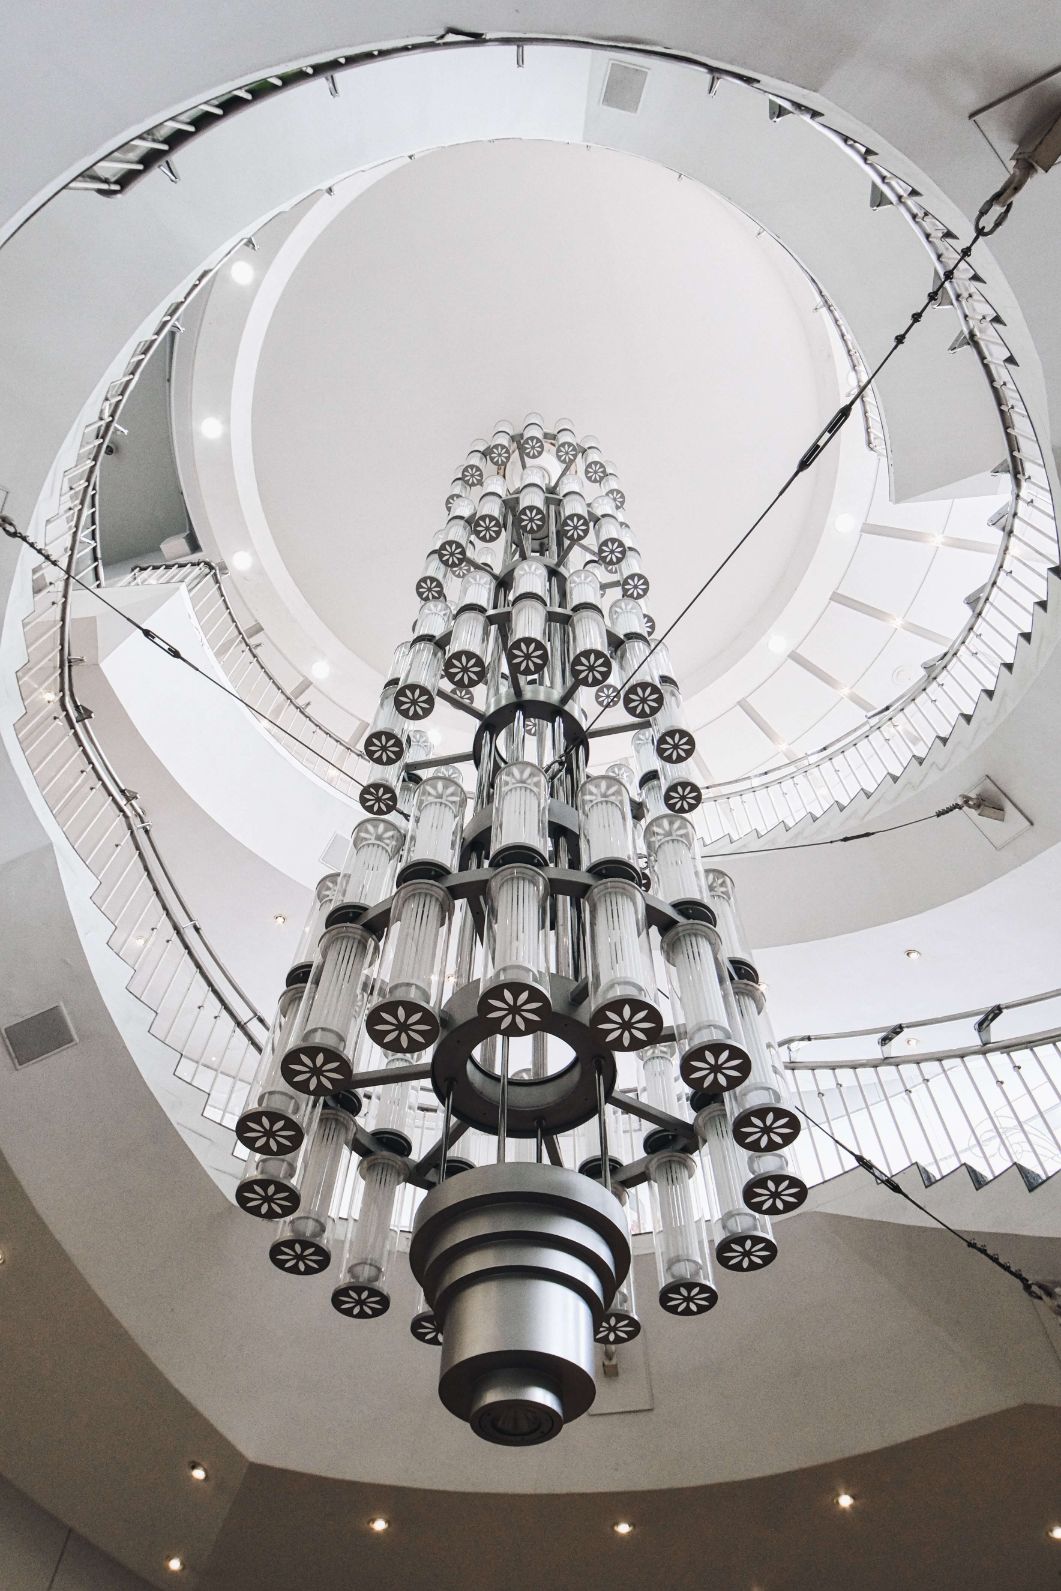 The chandelier drops down right in the middle of the spiral staircase. The long protruding chandelier acts as leading lines in the picture above.